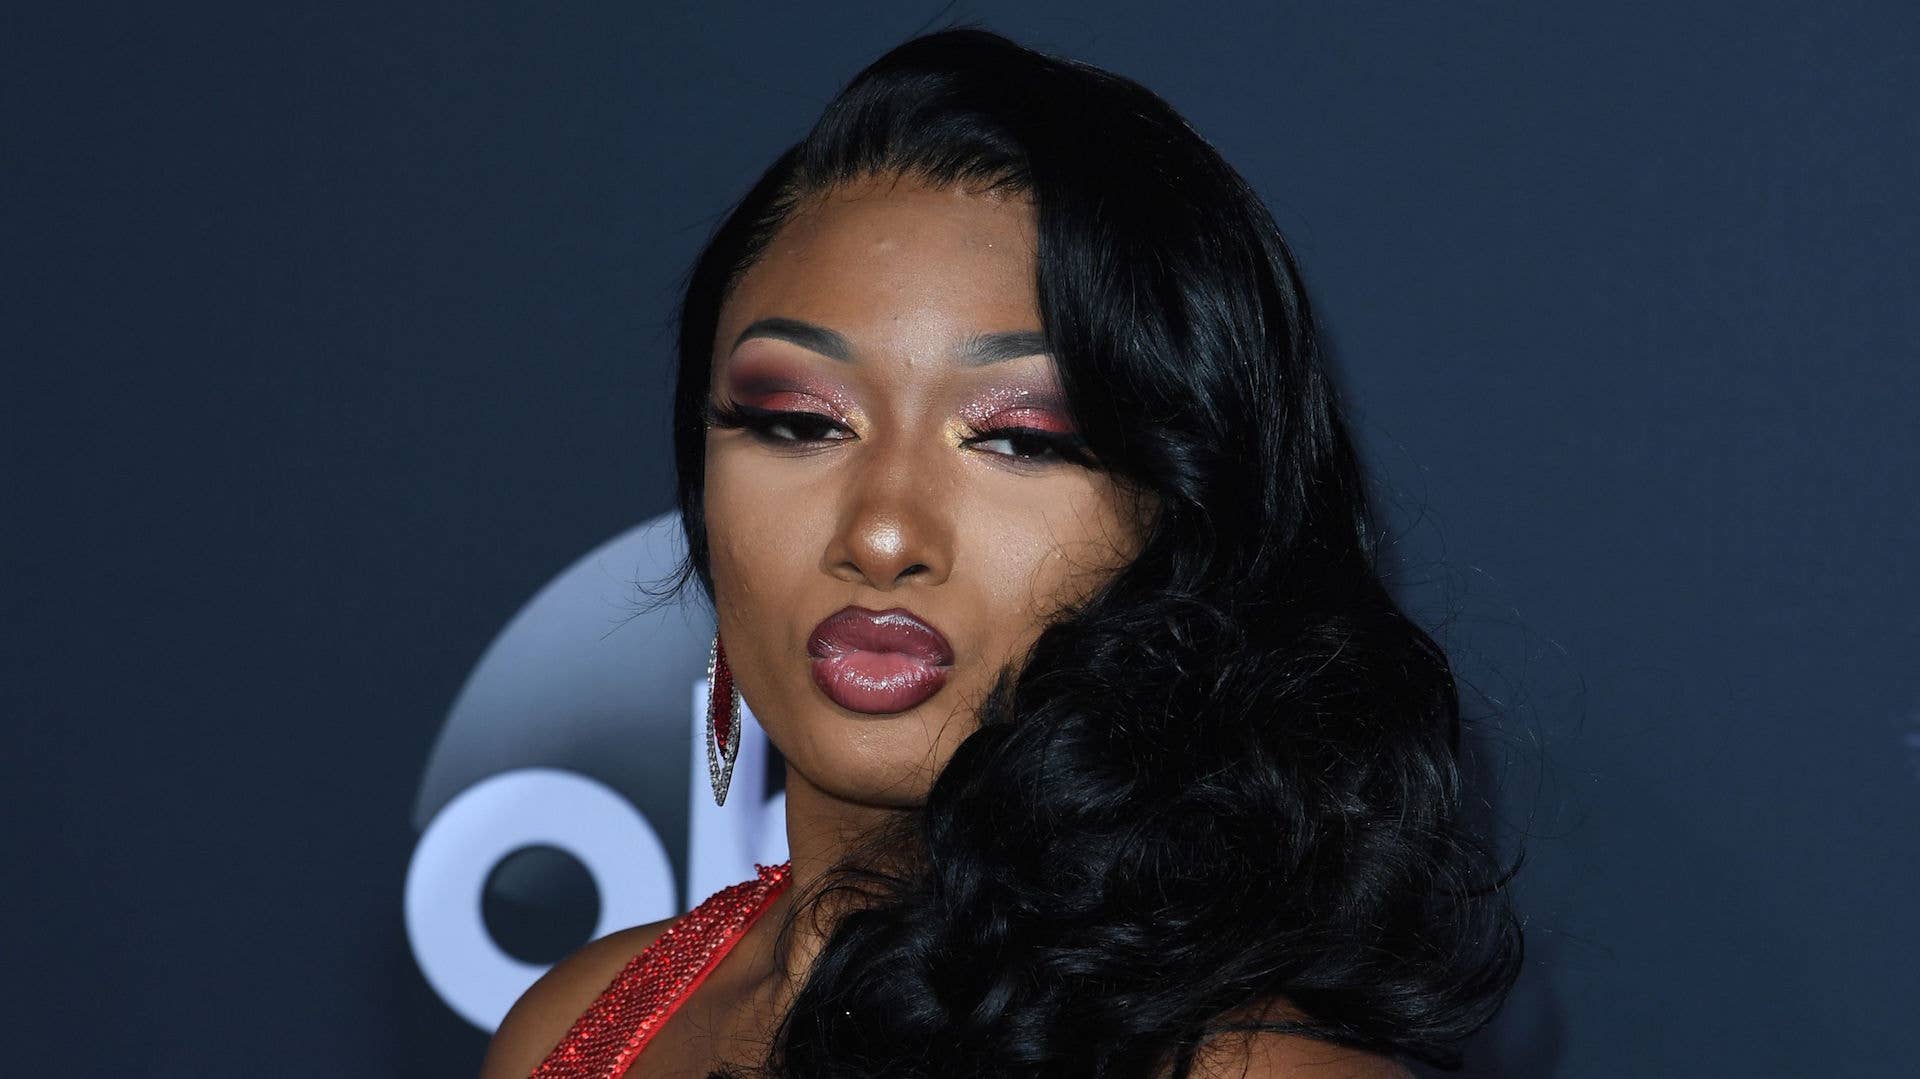 Megan Thee Stallion arrives for the 2019 American Music Awards